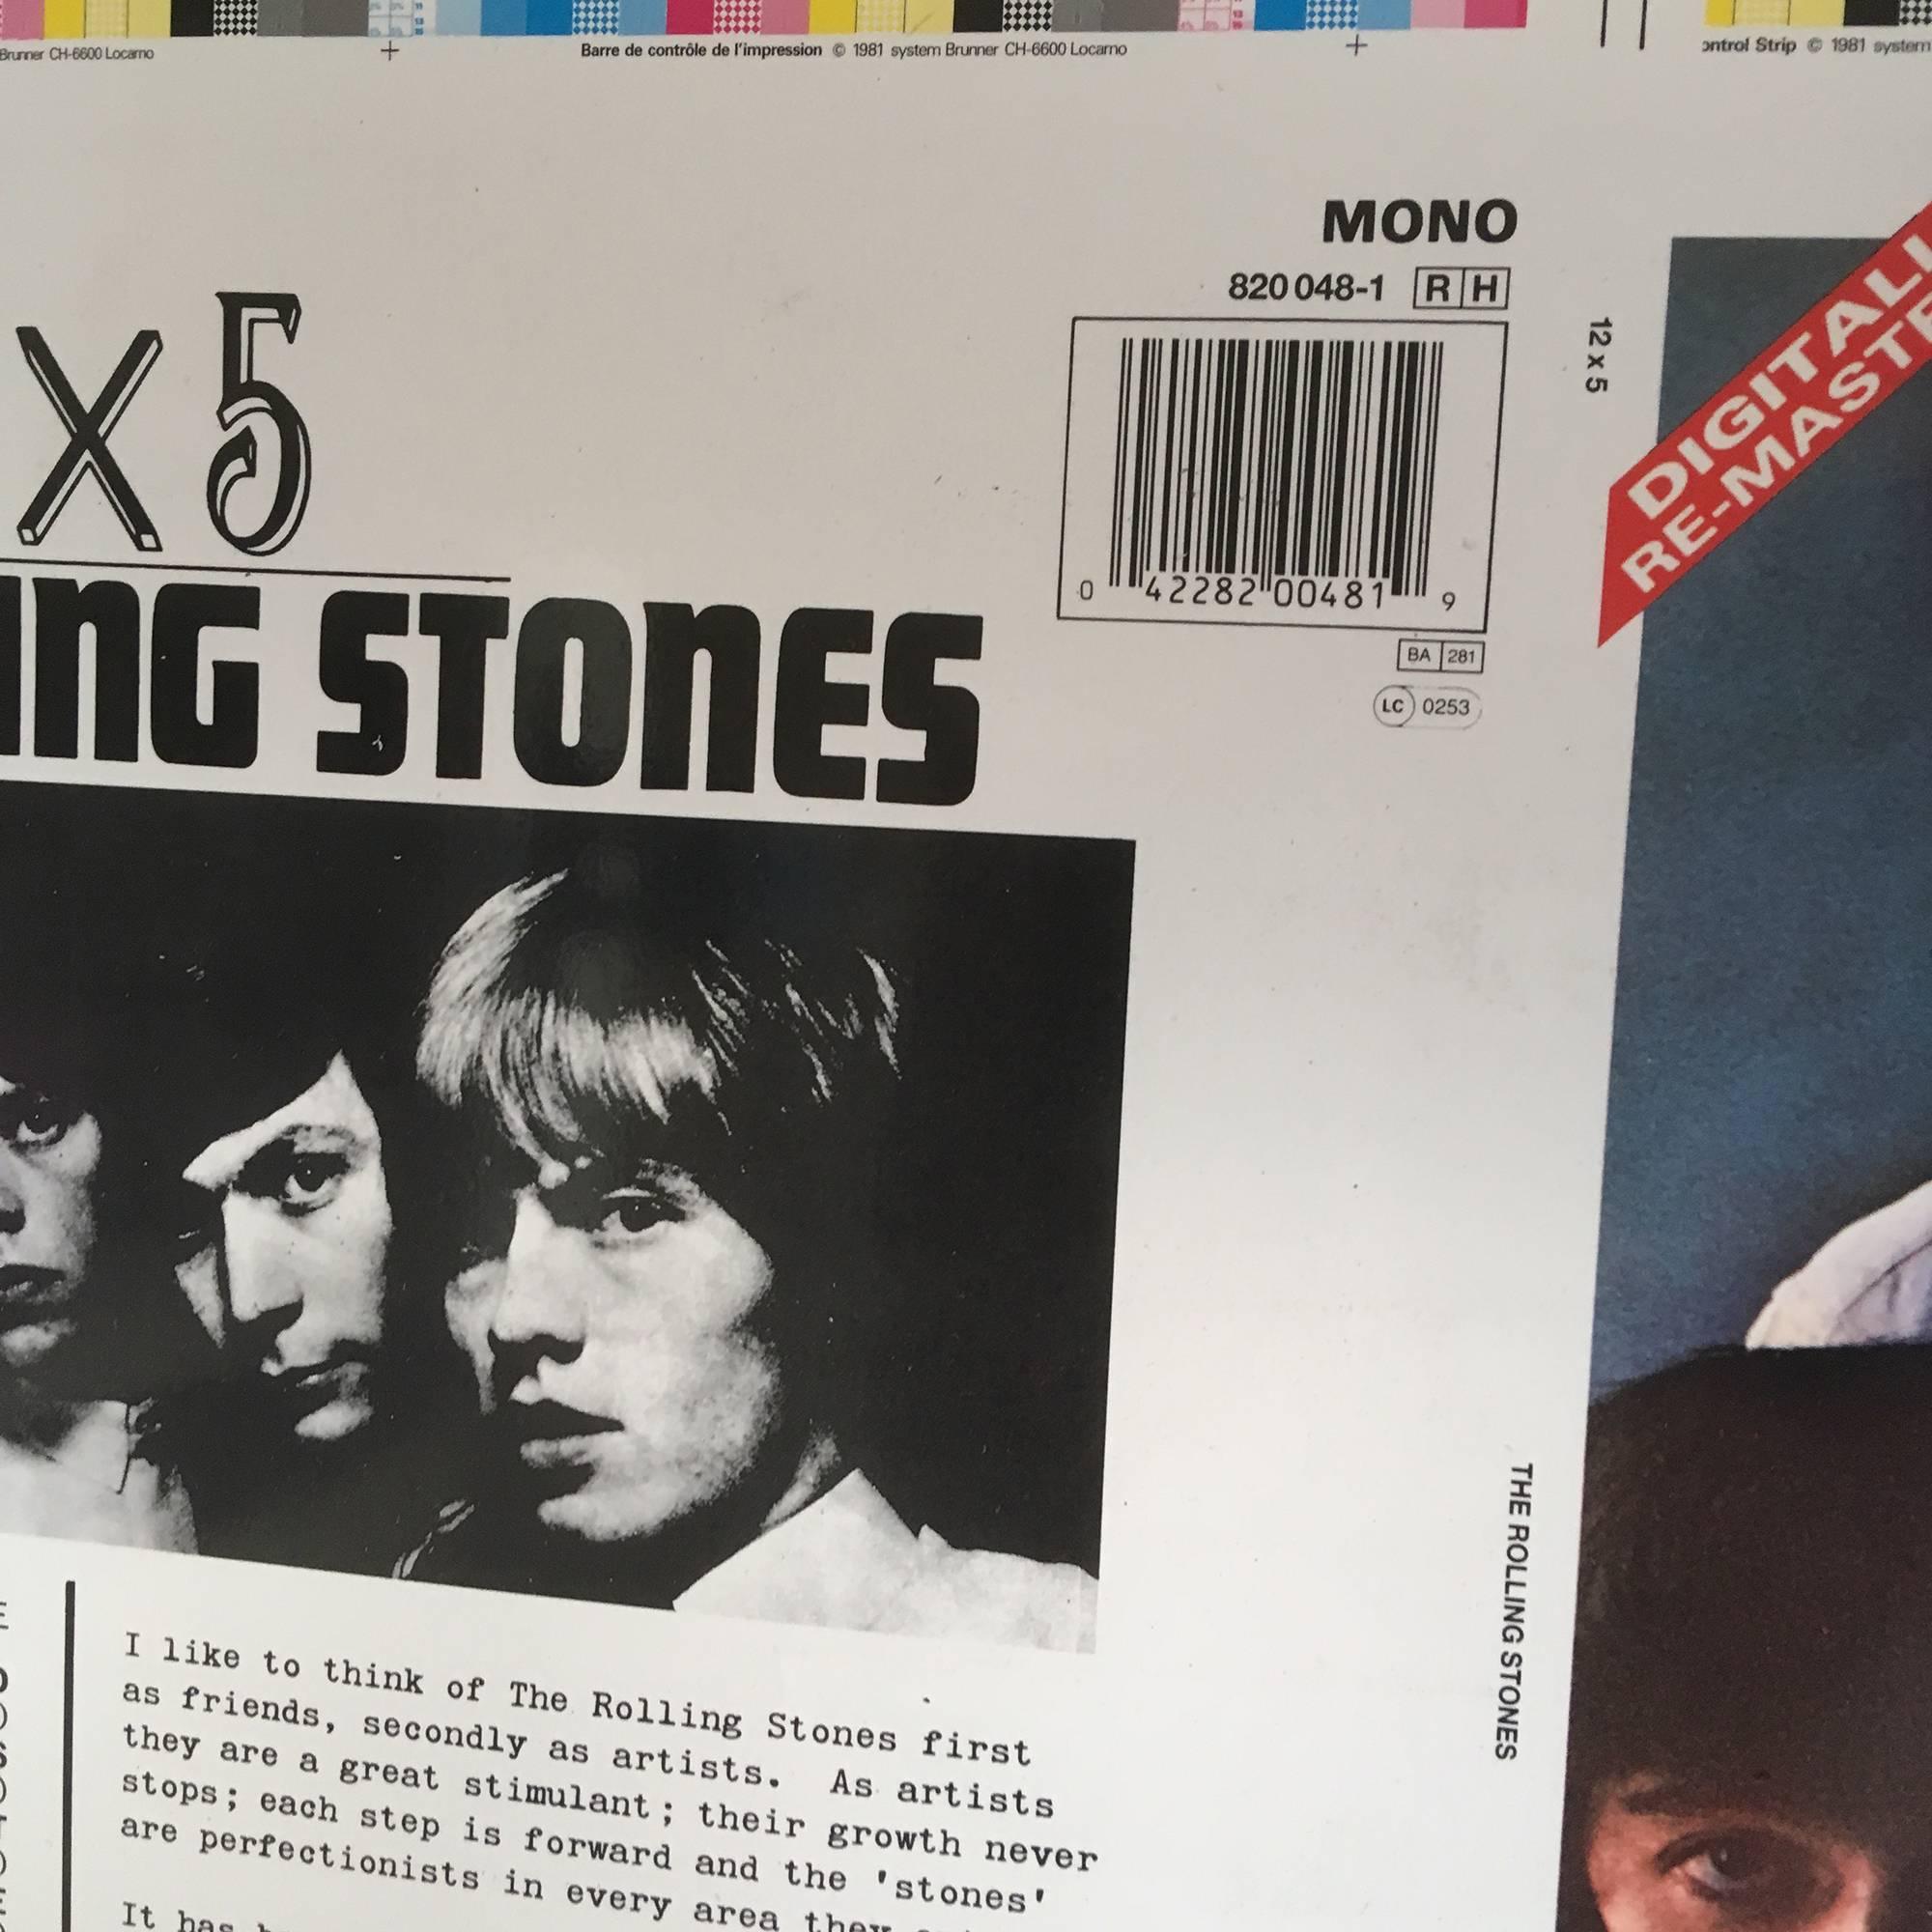 ROLLING STONES 12x5 Album An Extremely Rare Cromalin Proof Part of The Original Production Artwork in an unreleased state from 1984 (33 years old)
The album was never released on Vinyl in this state on this label with this code
LONDON 820 048-1
Two